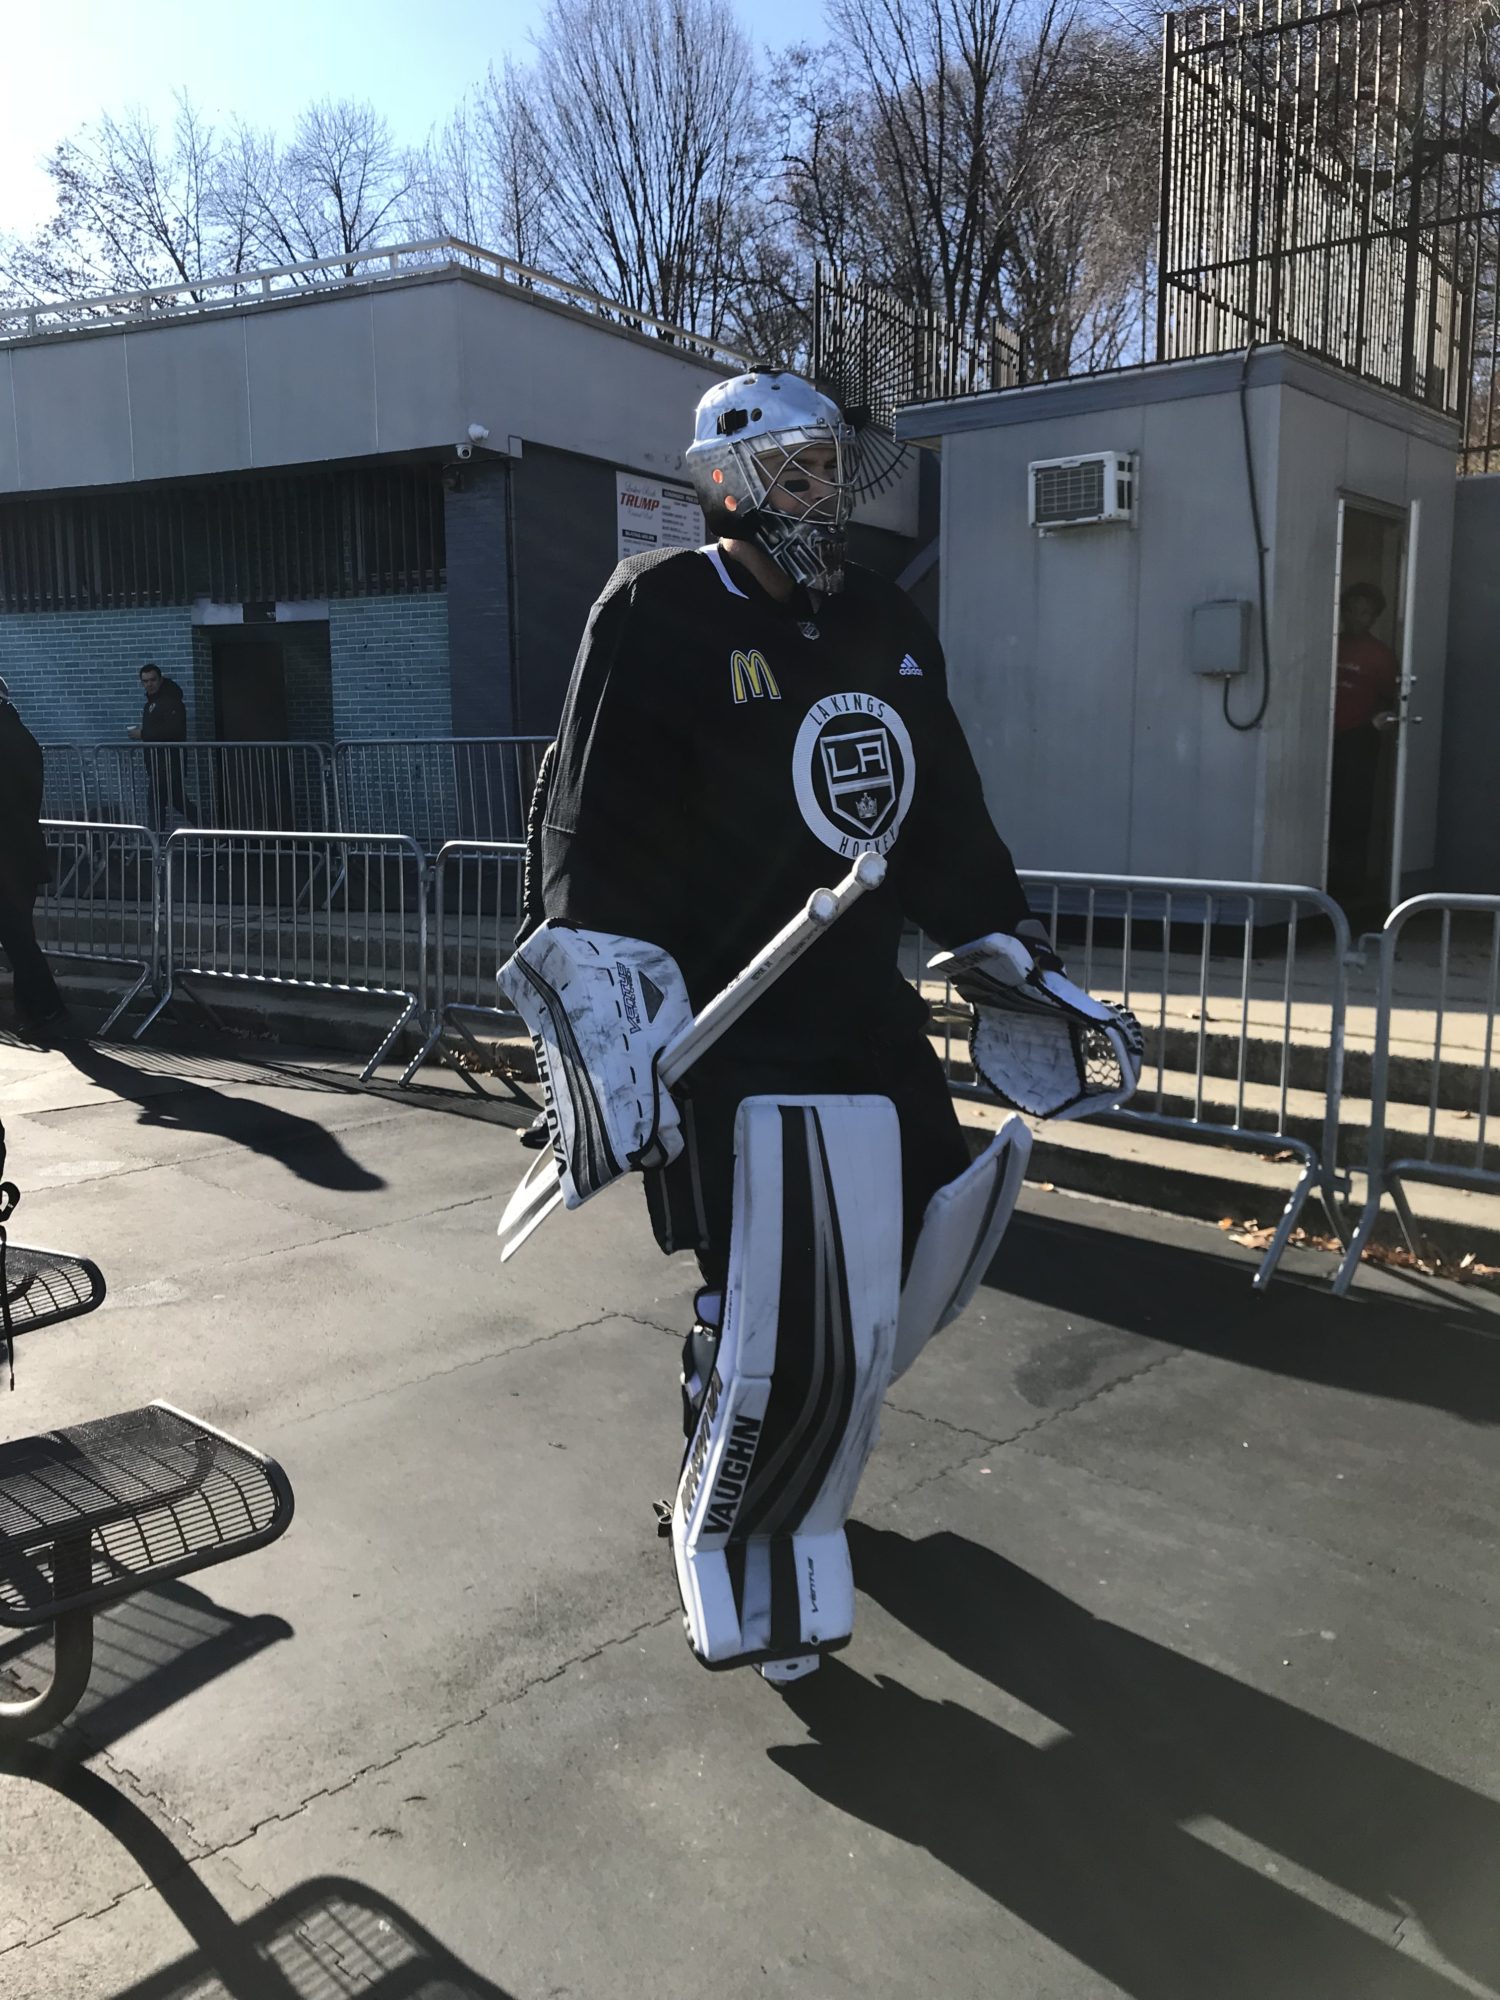 The LA Kings took their practice outdoors to Central Park on